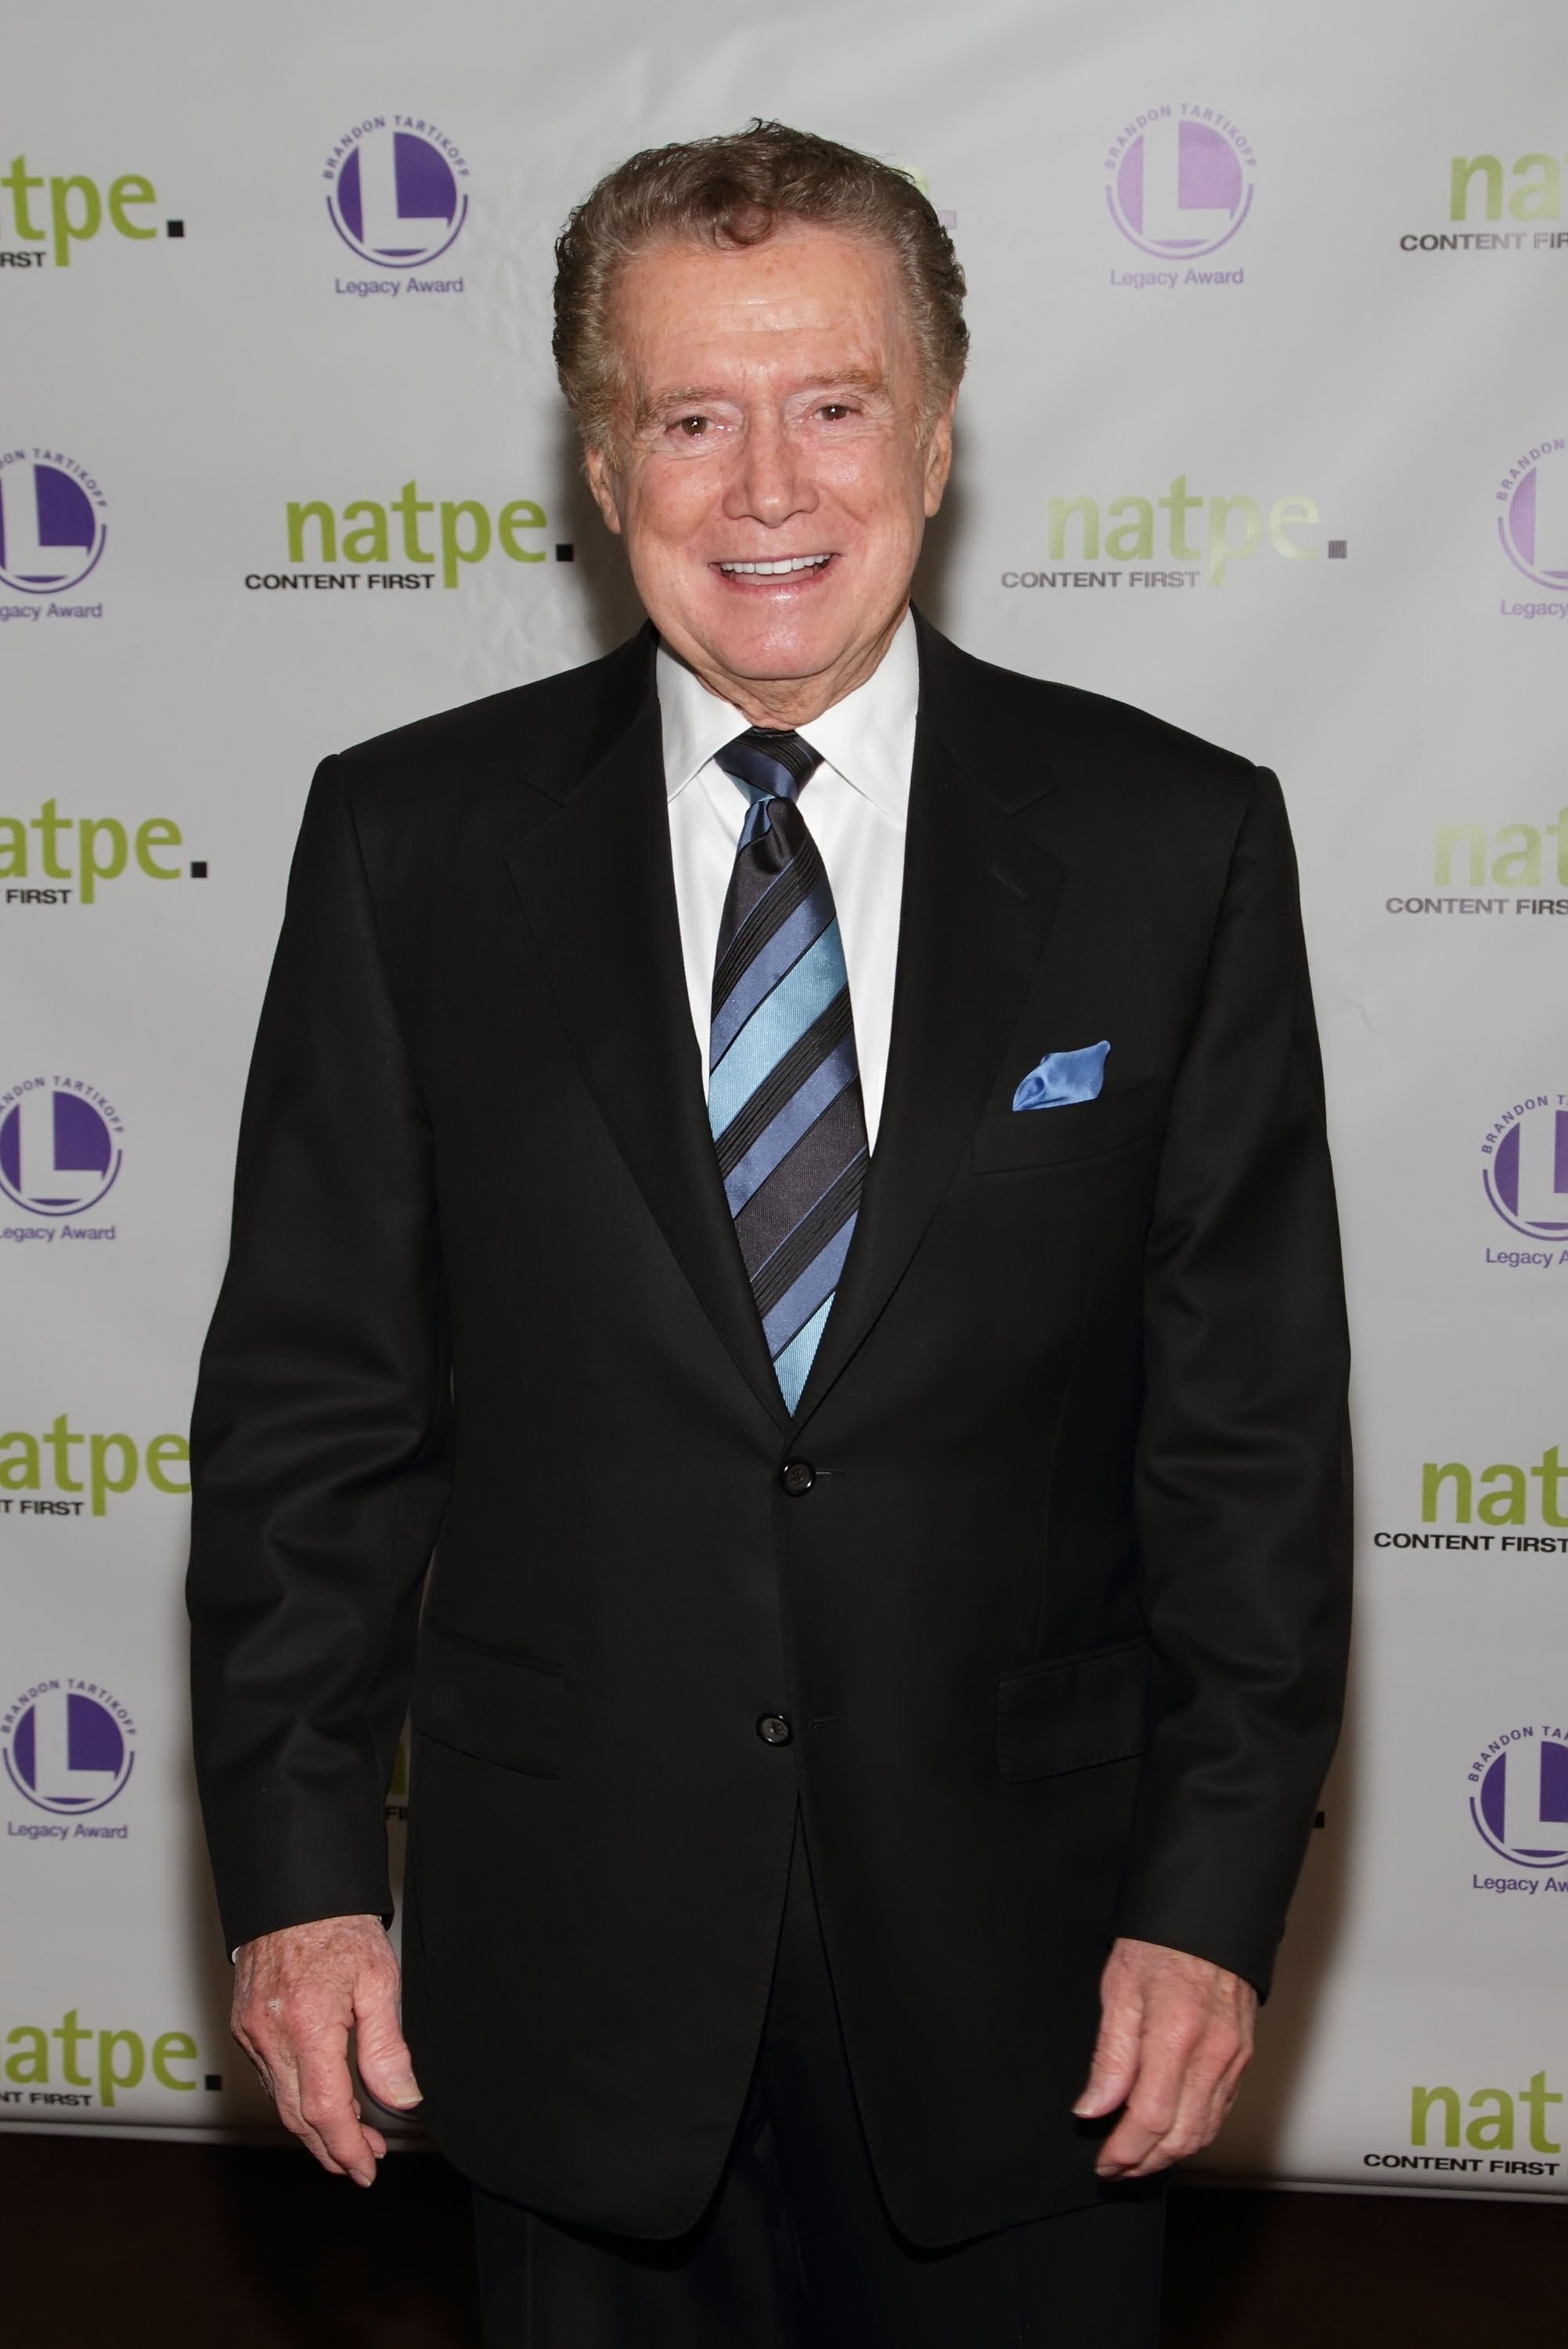 Regis Philbin at the 8th Annual NATPE Brandon Tartikoff Legacy Awards on January 25, 2011, in Miami Beach, Florida. | Source: Alexander Tamargo/Getty Images